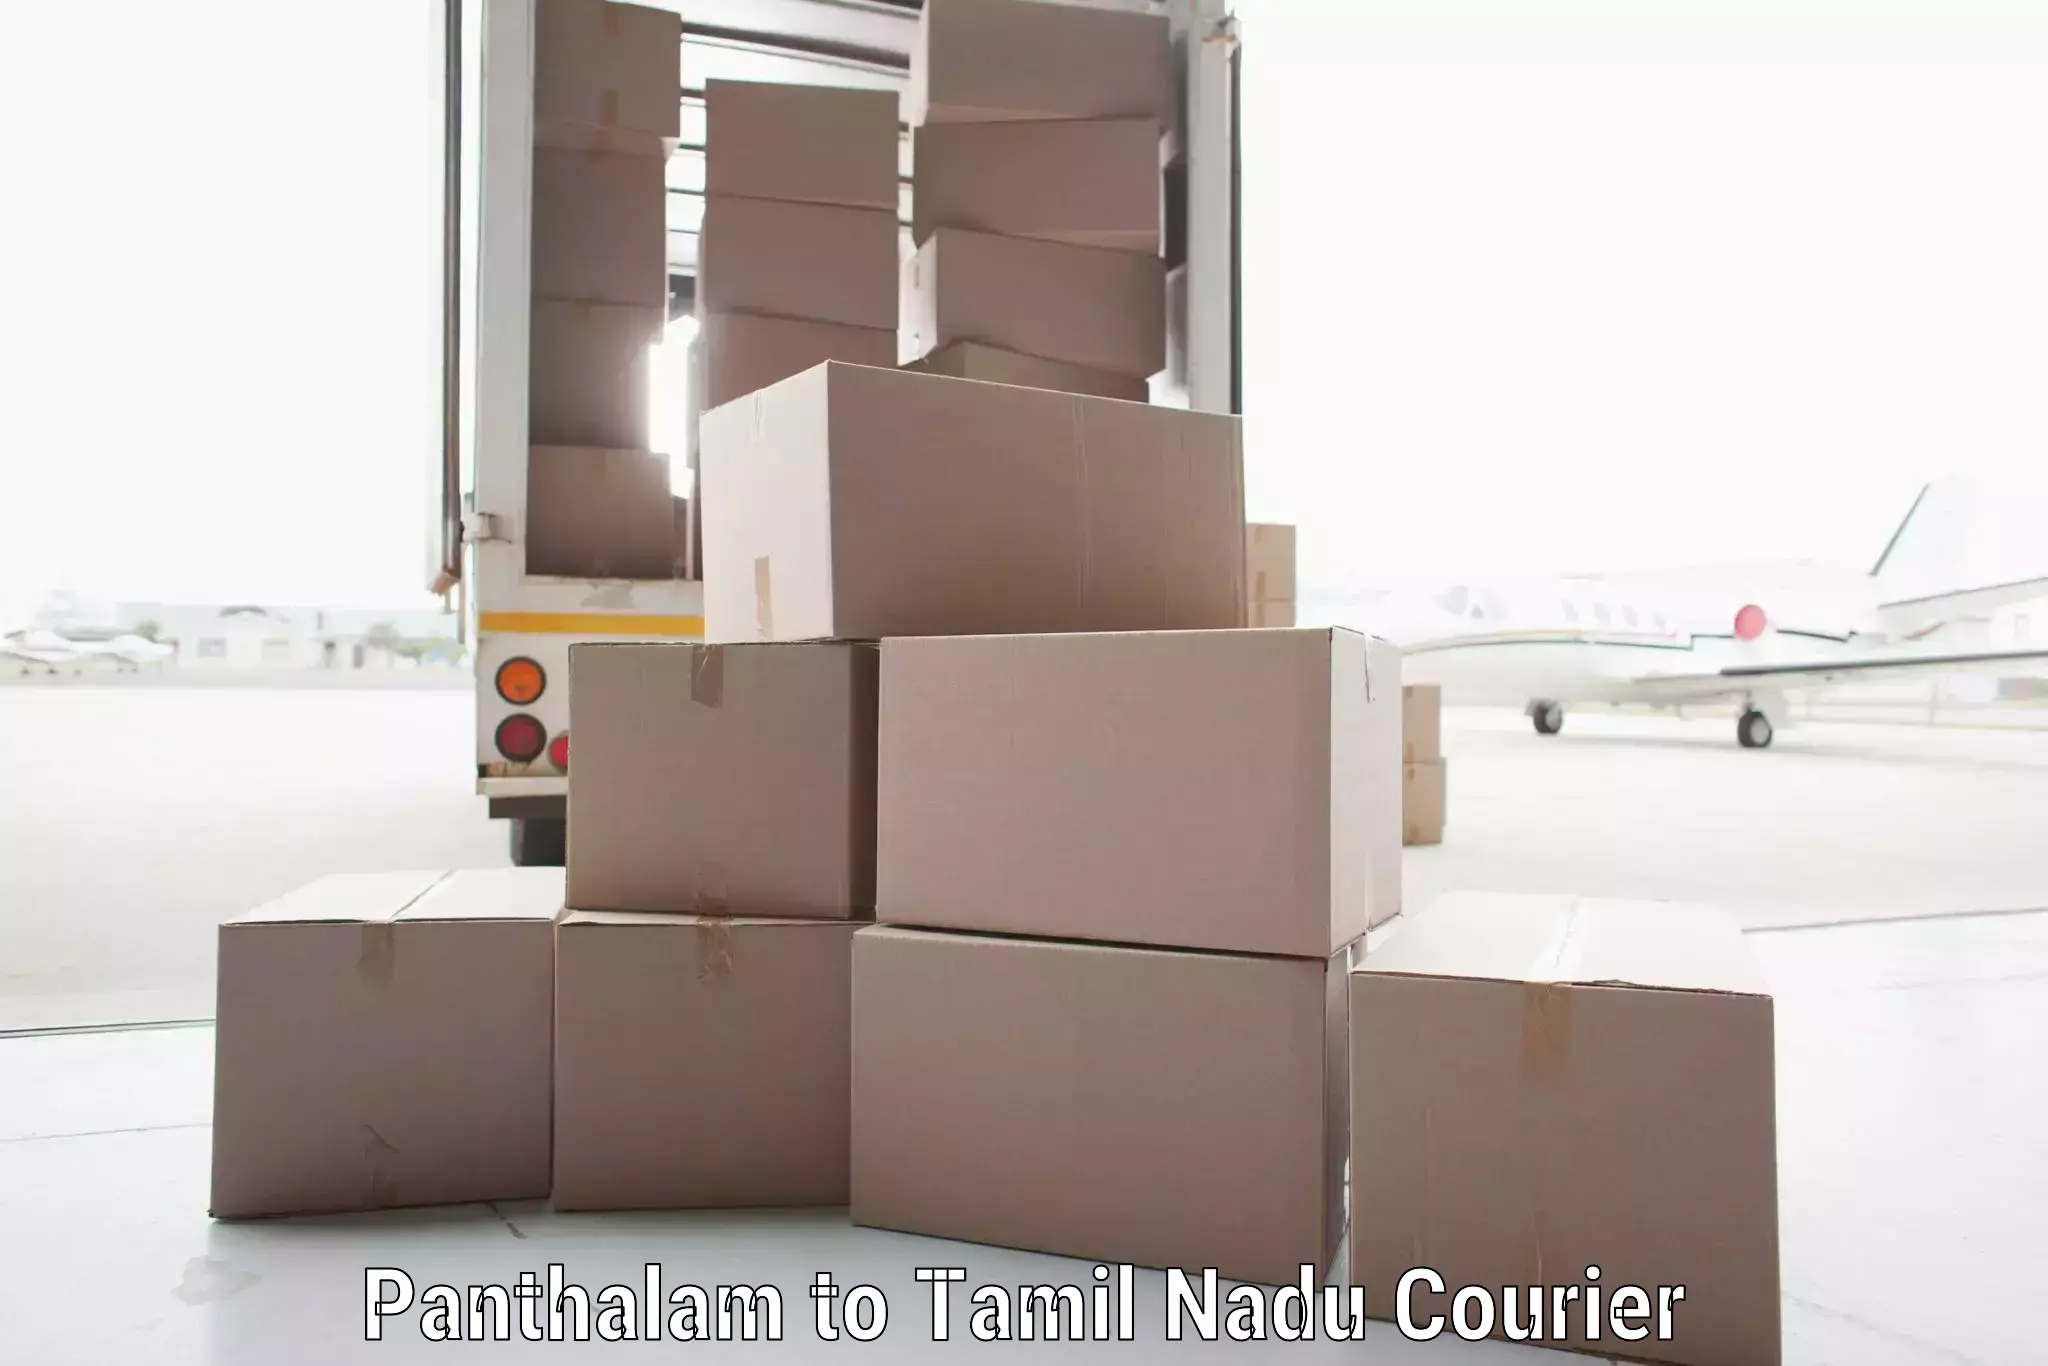 24-hour courier service Panthalam to Tuticorin Port